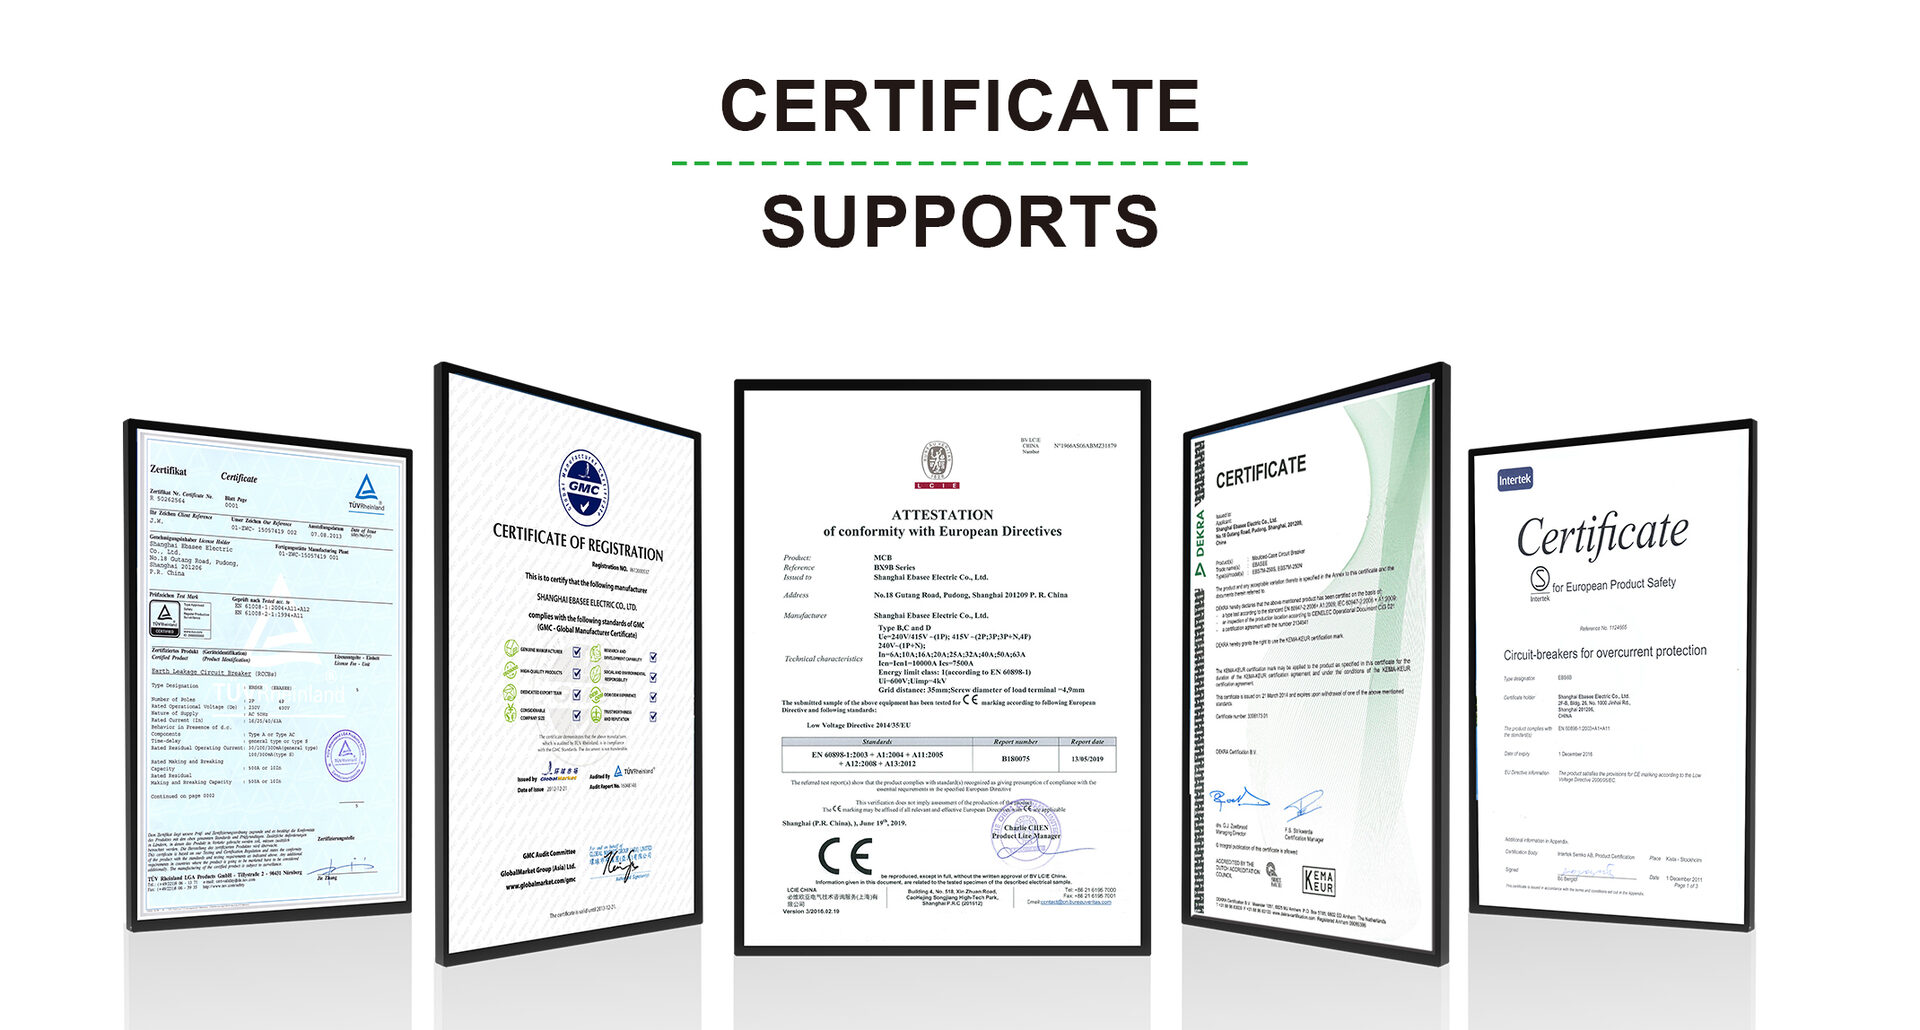 CERTIFICATE SUPPORTS